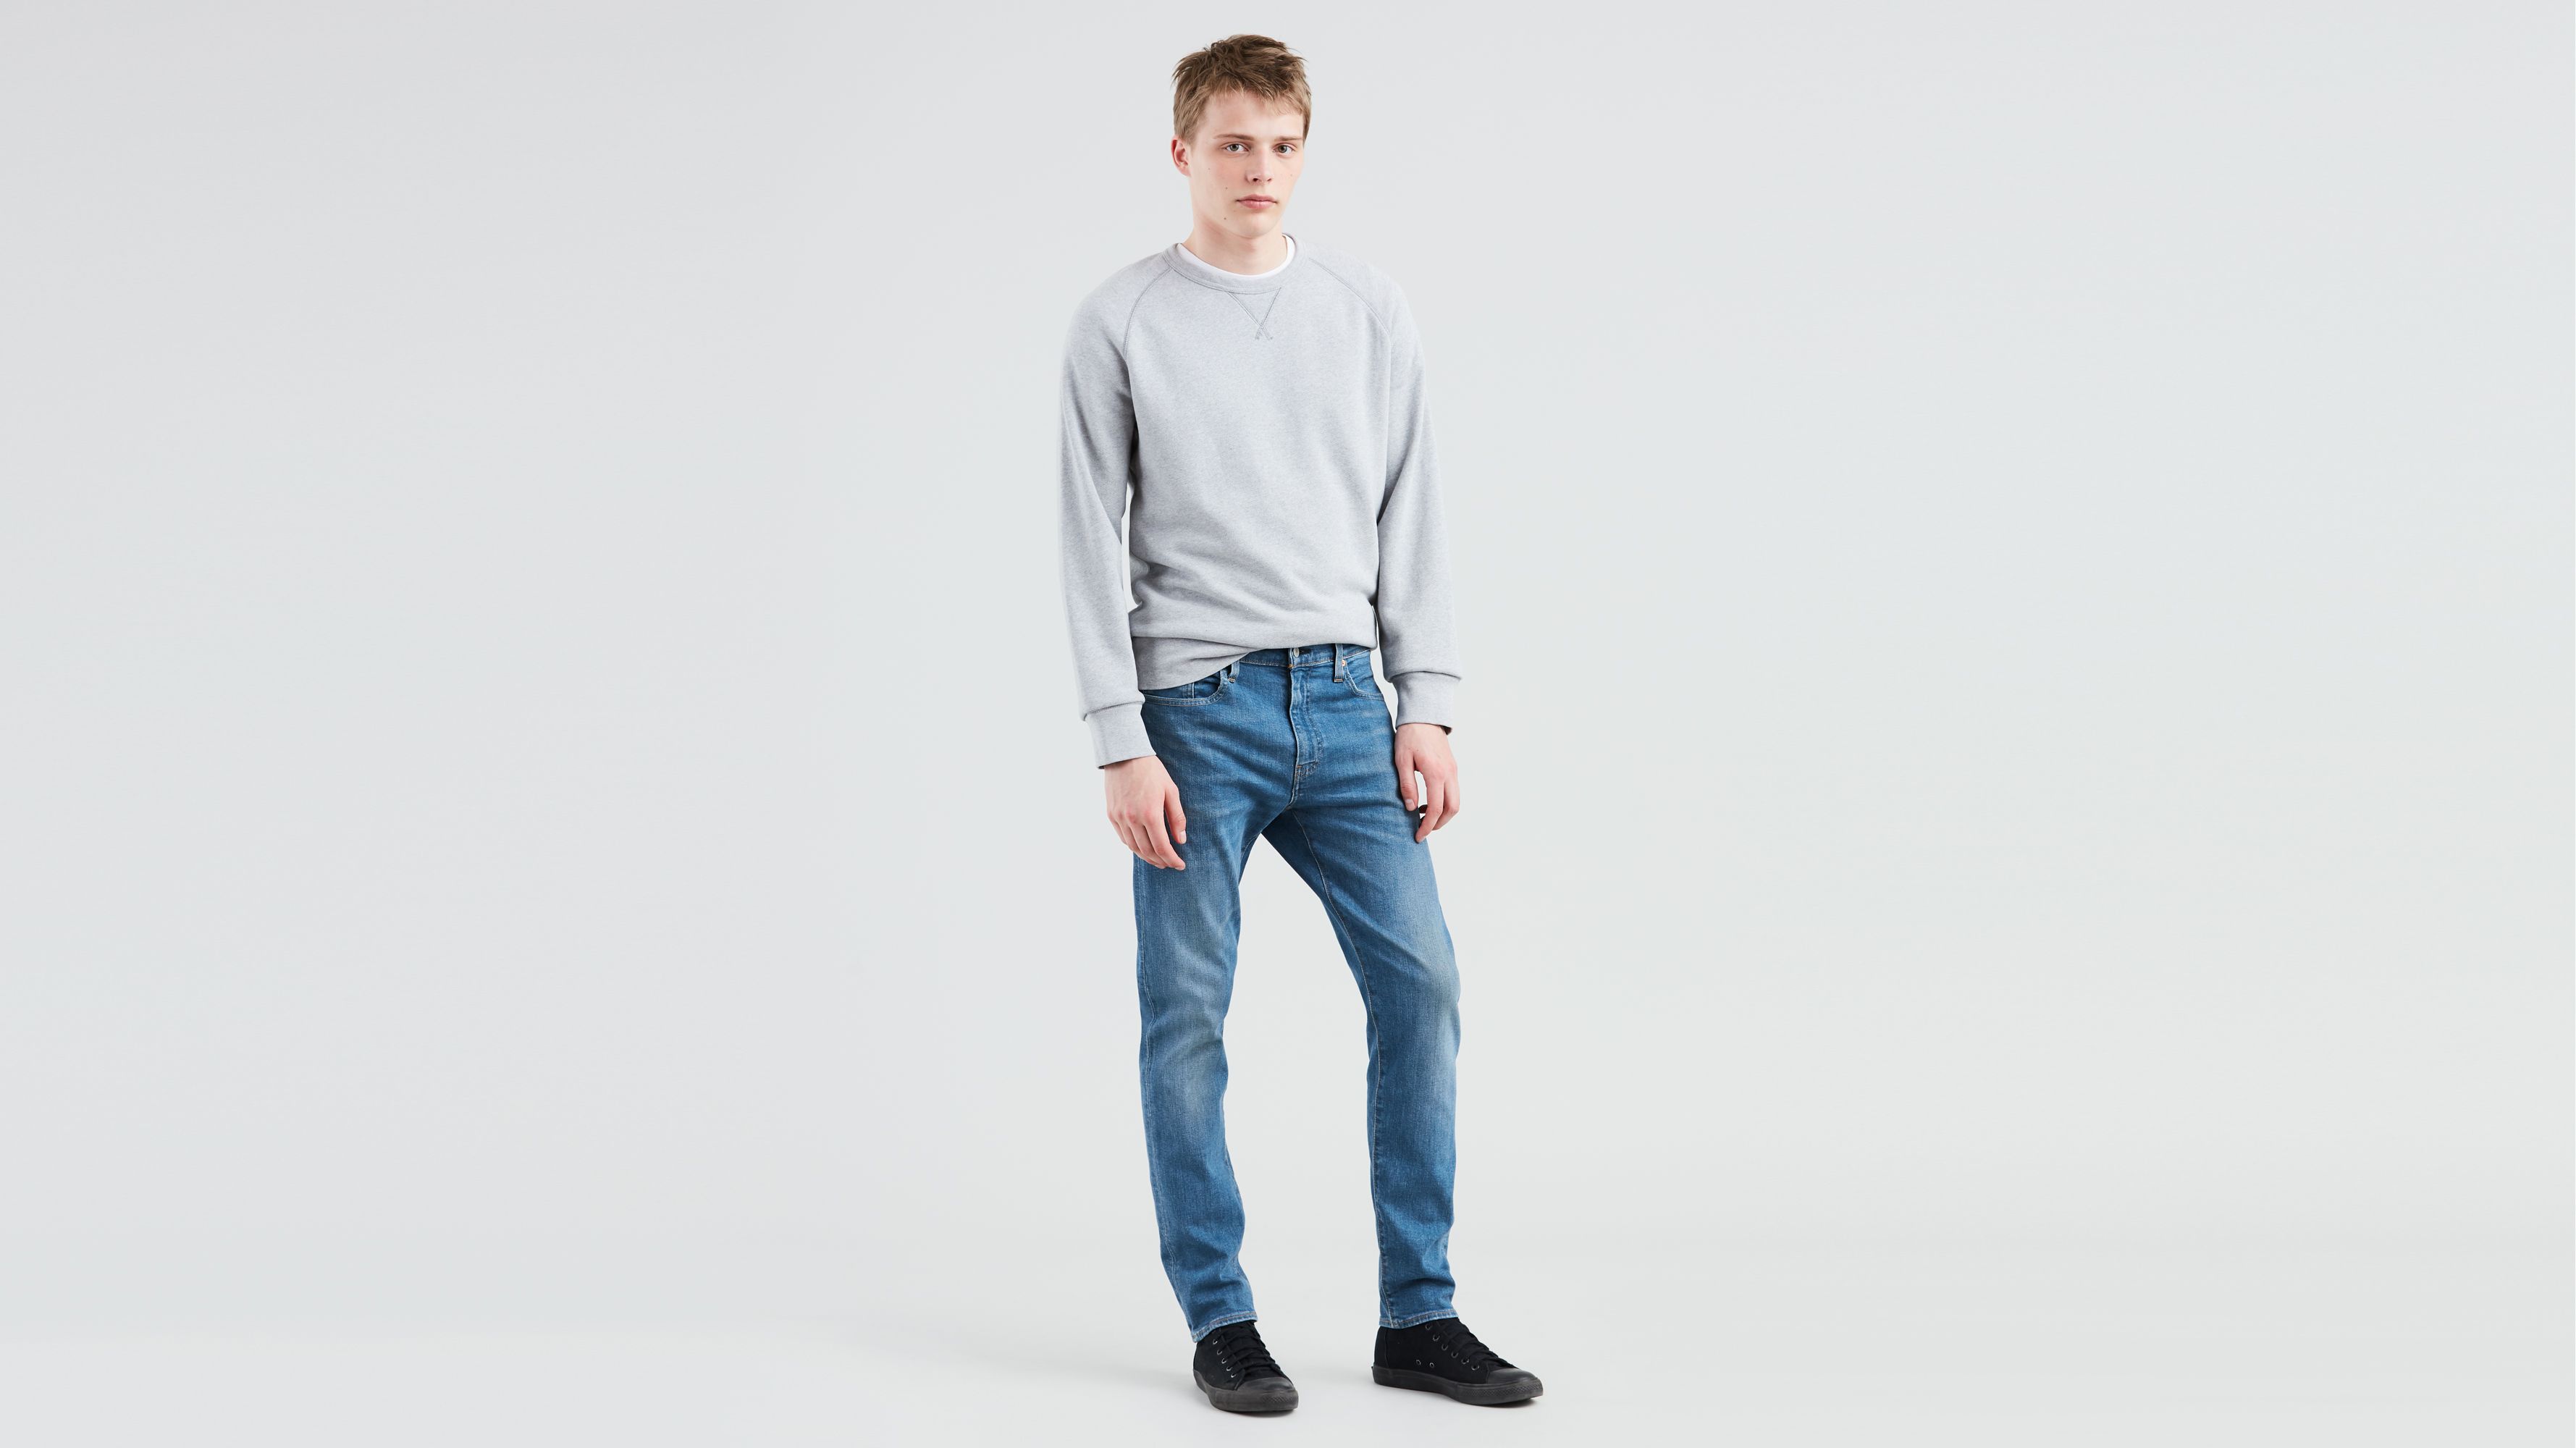 levi's 512 tapered jeans